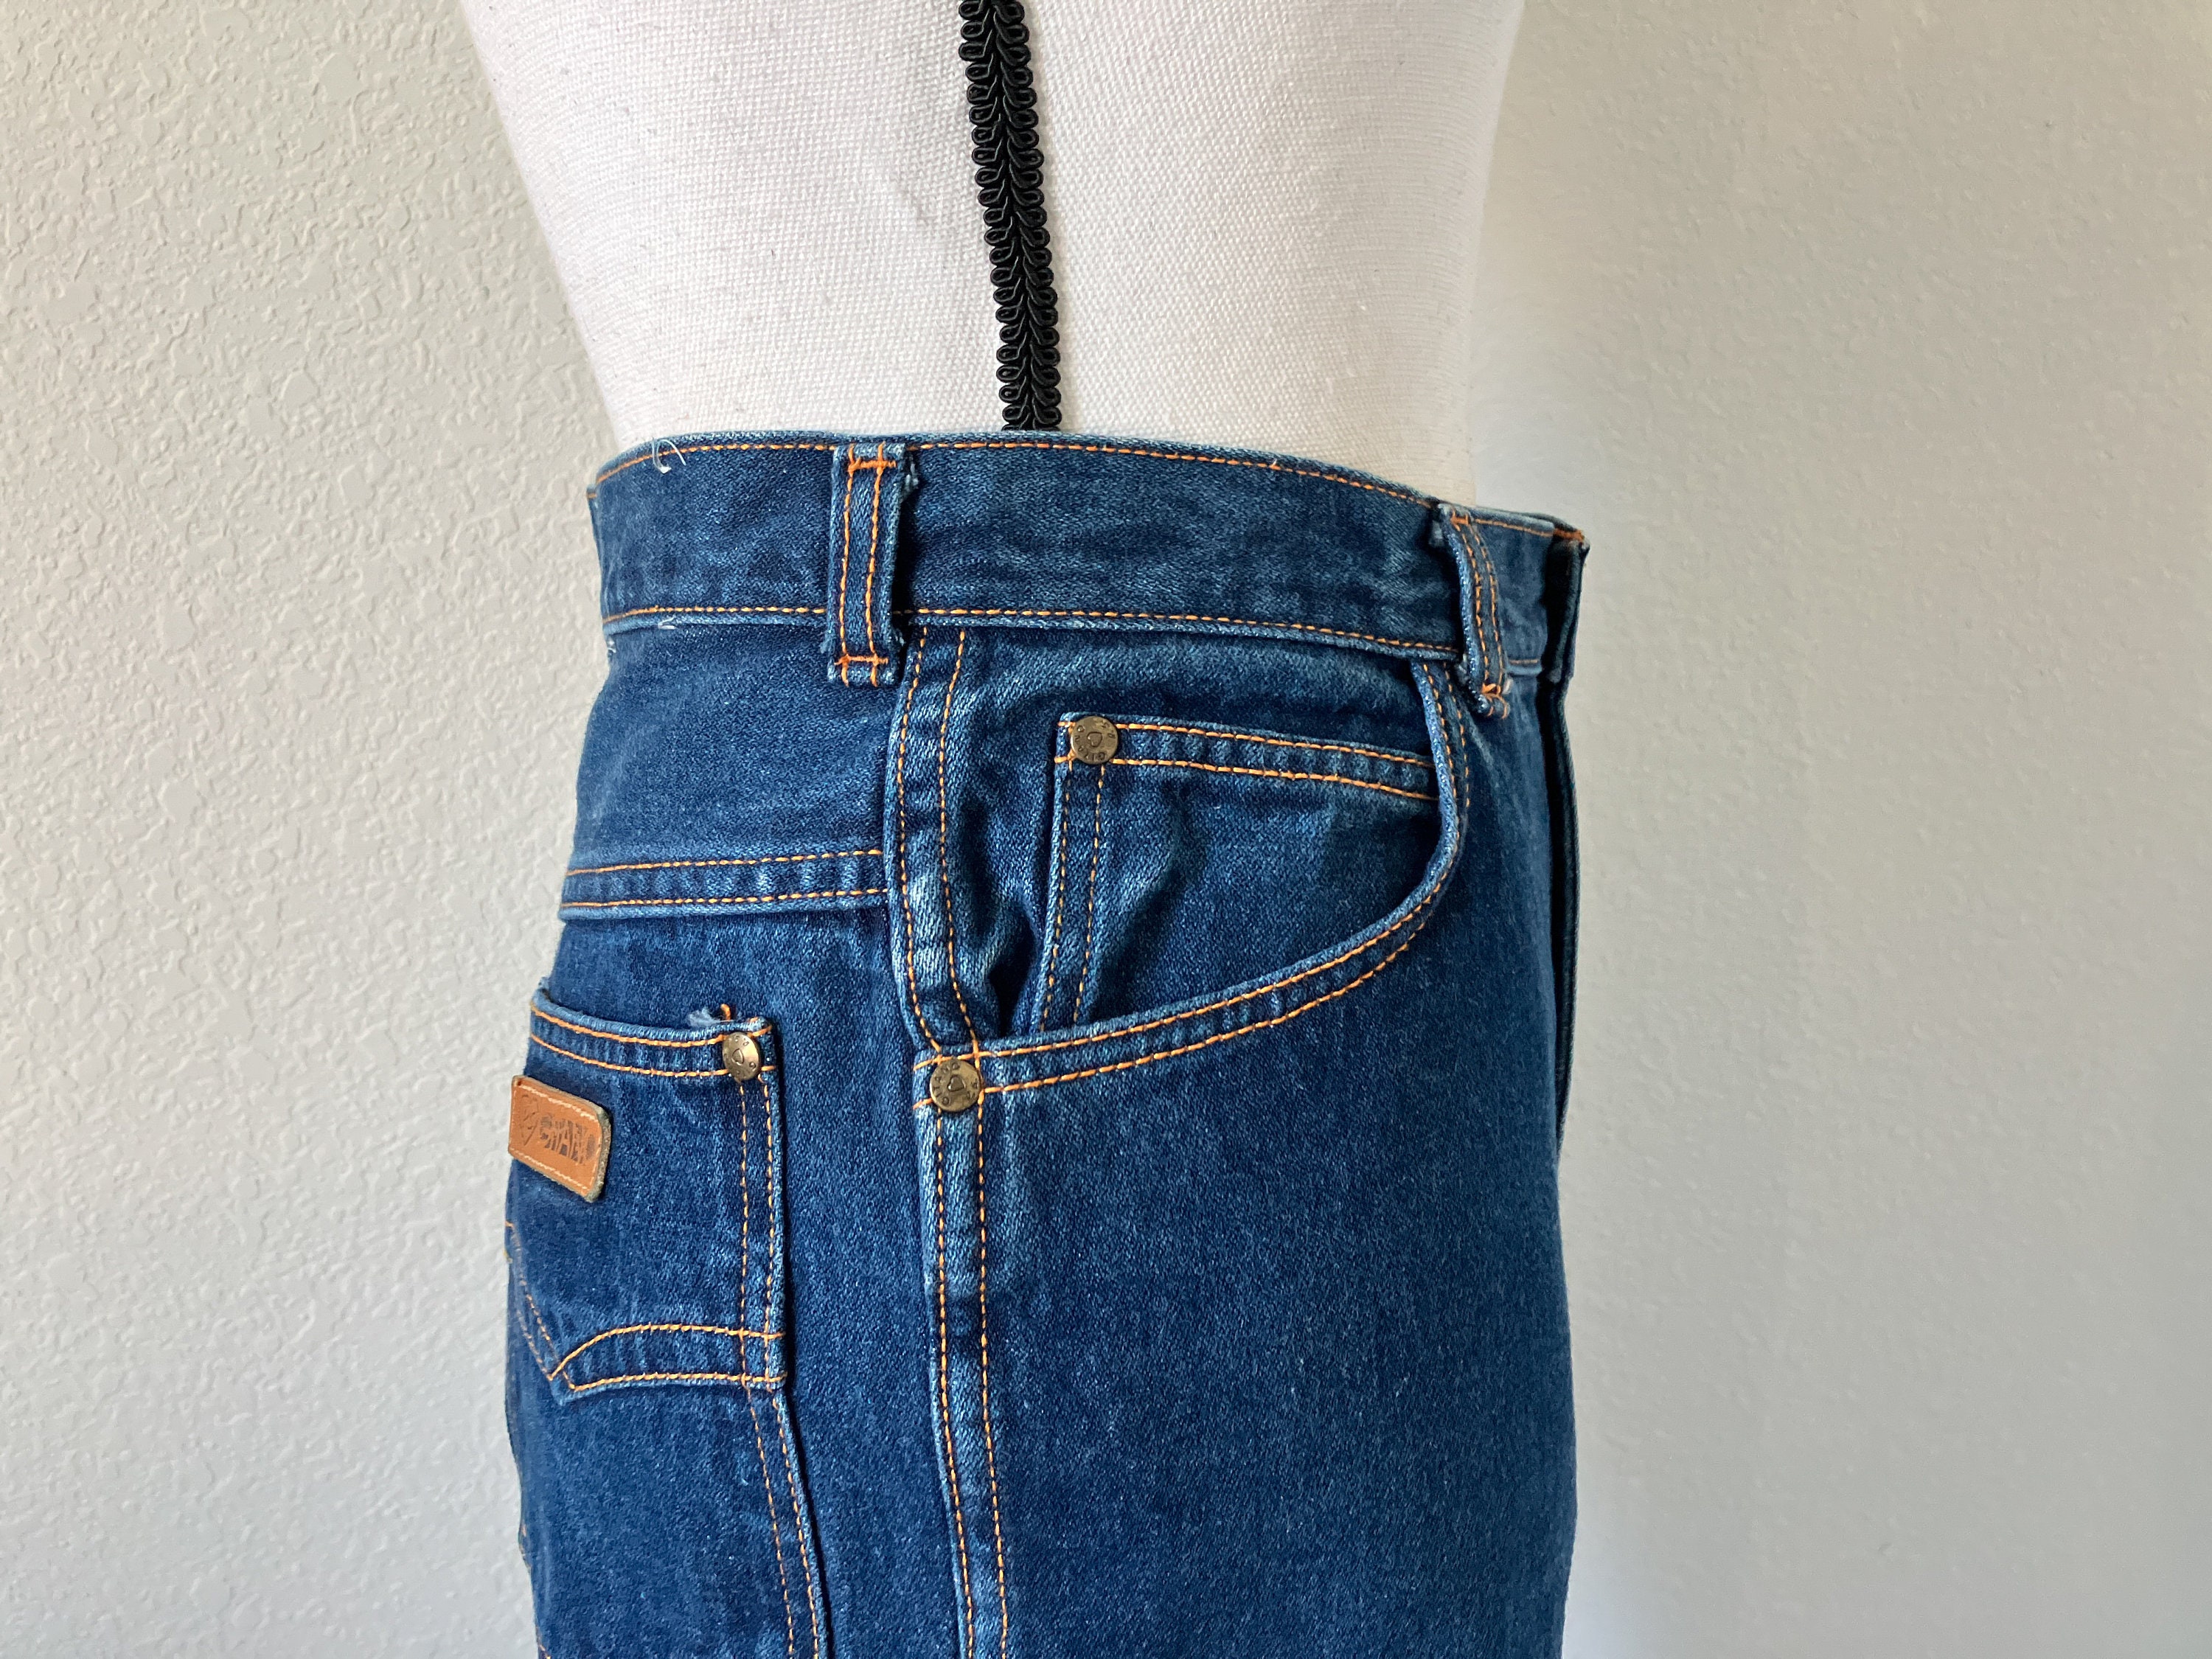 1980s High Waisted Jeans, Vintage Etsy Dark Jeans Wash - Mom